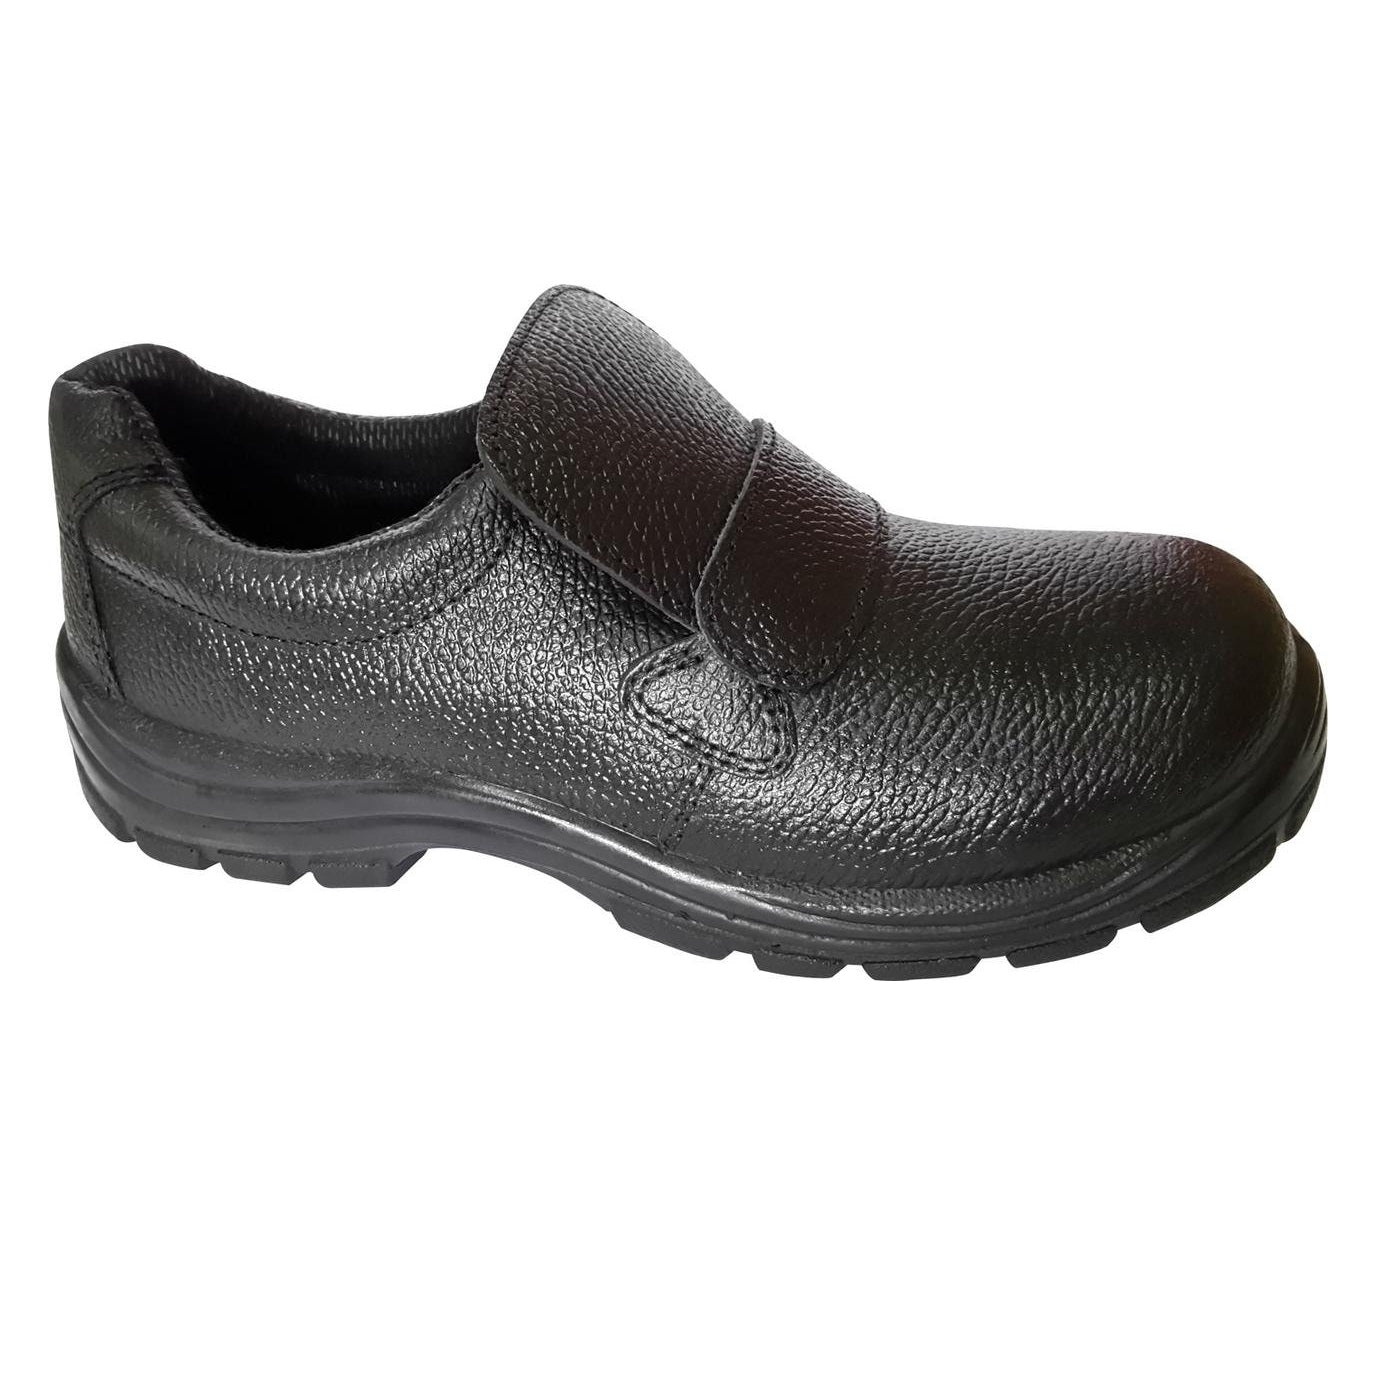 Emperor Slip-on Model Leather Safety Shoe without Lace SLIP-ON